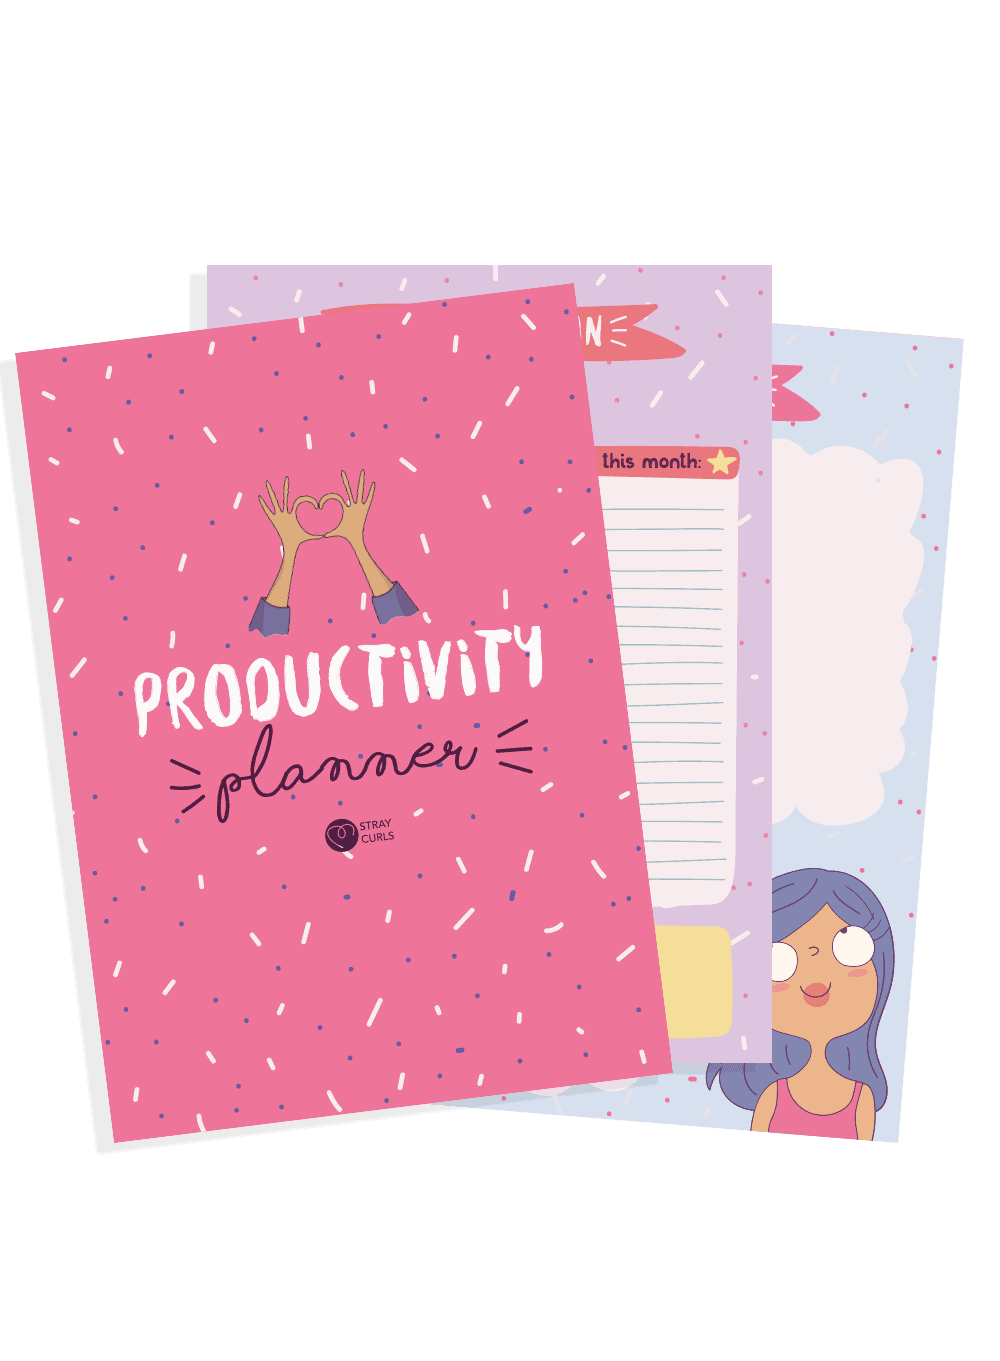 Get this delightful Productivity Planner to boost your productivity and make working on your Blog more fun!